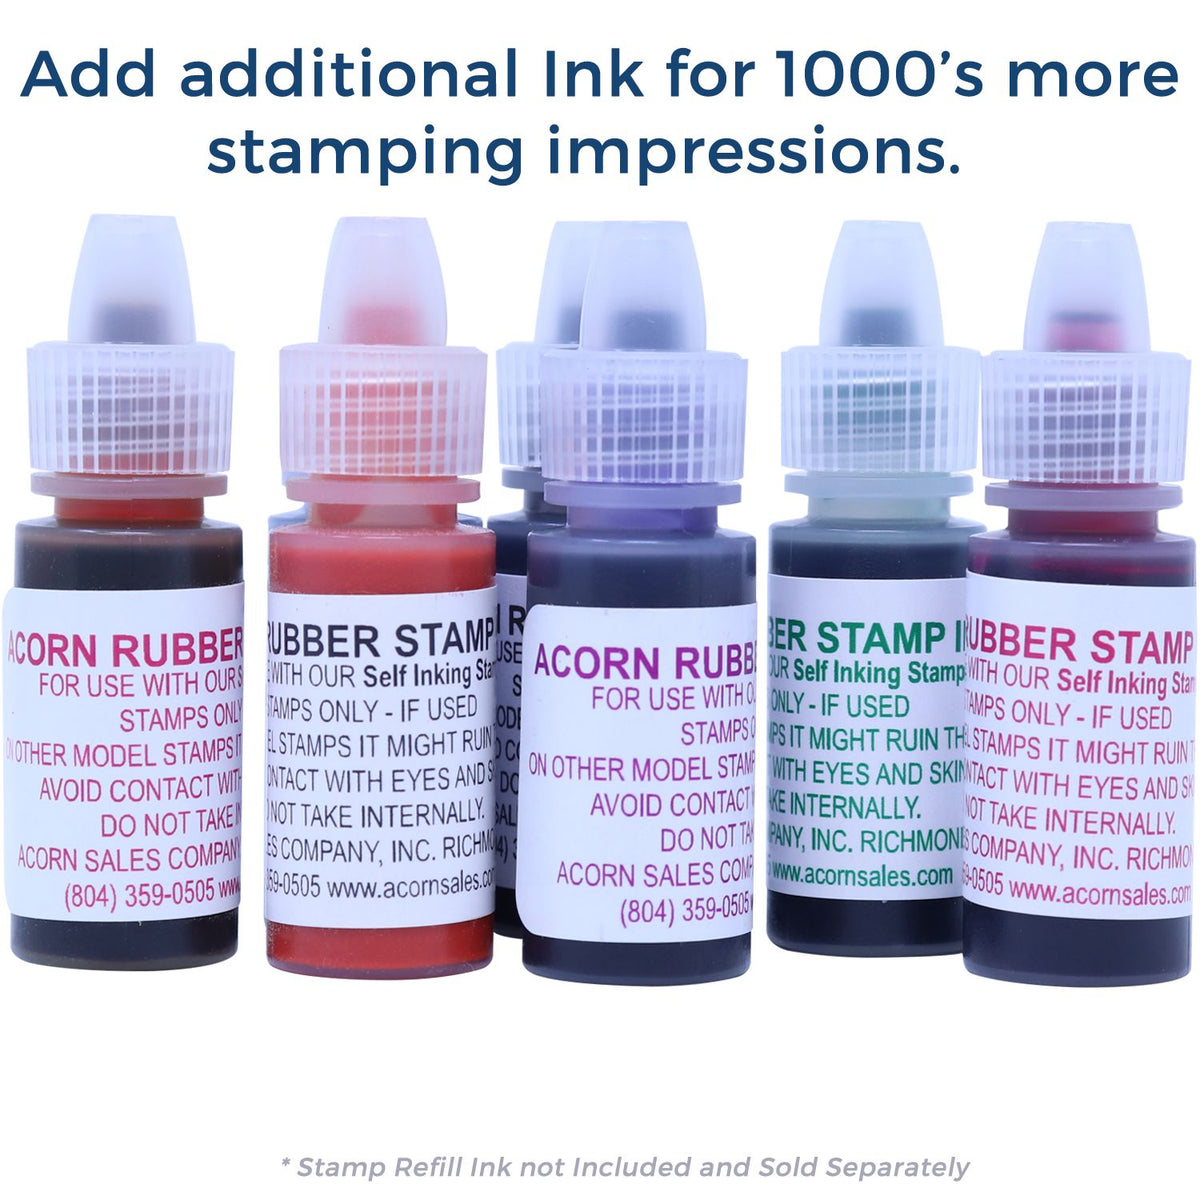 Refill Ink for Self-Inking Round Keep up the Good Work Stamp Available